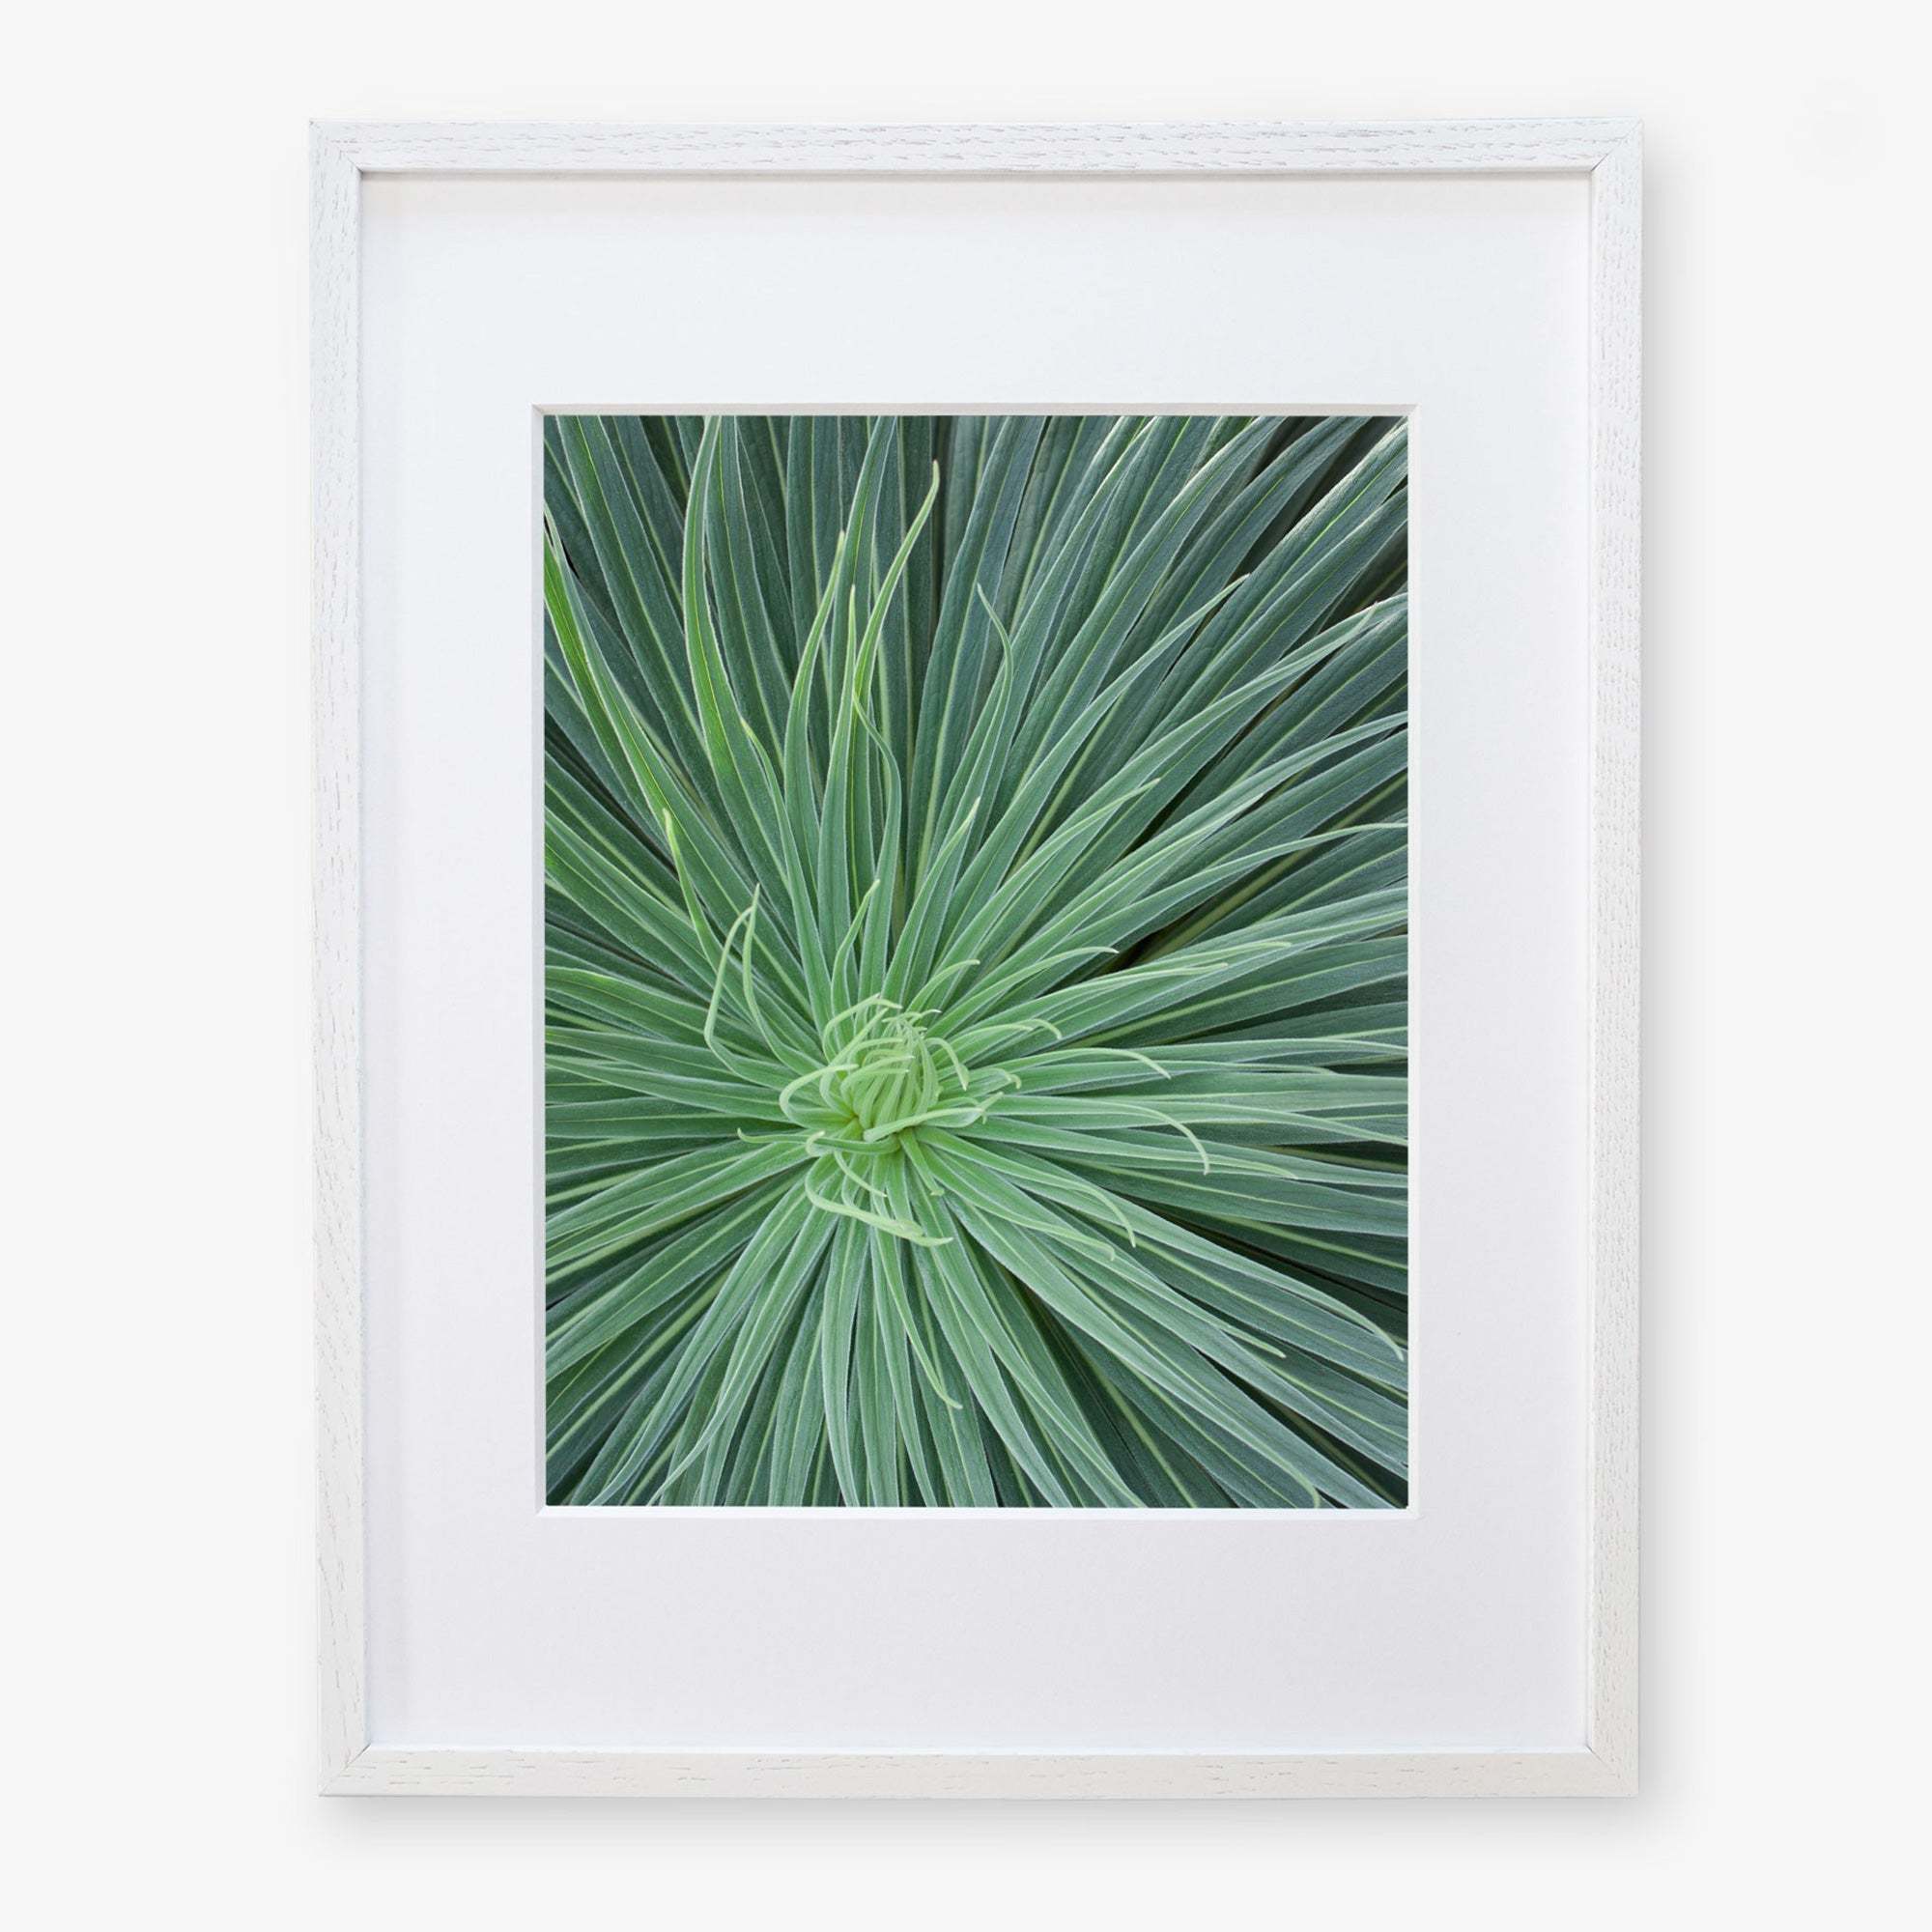 Framed photograph of Offley Green&#39;s Green Botanical Wall Art &#39;Desert Fireworks II&#39;, a green, spiky desert plant with long, thin leaves radiating from its center, displayed against a white background, encased in a white frame.